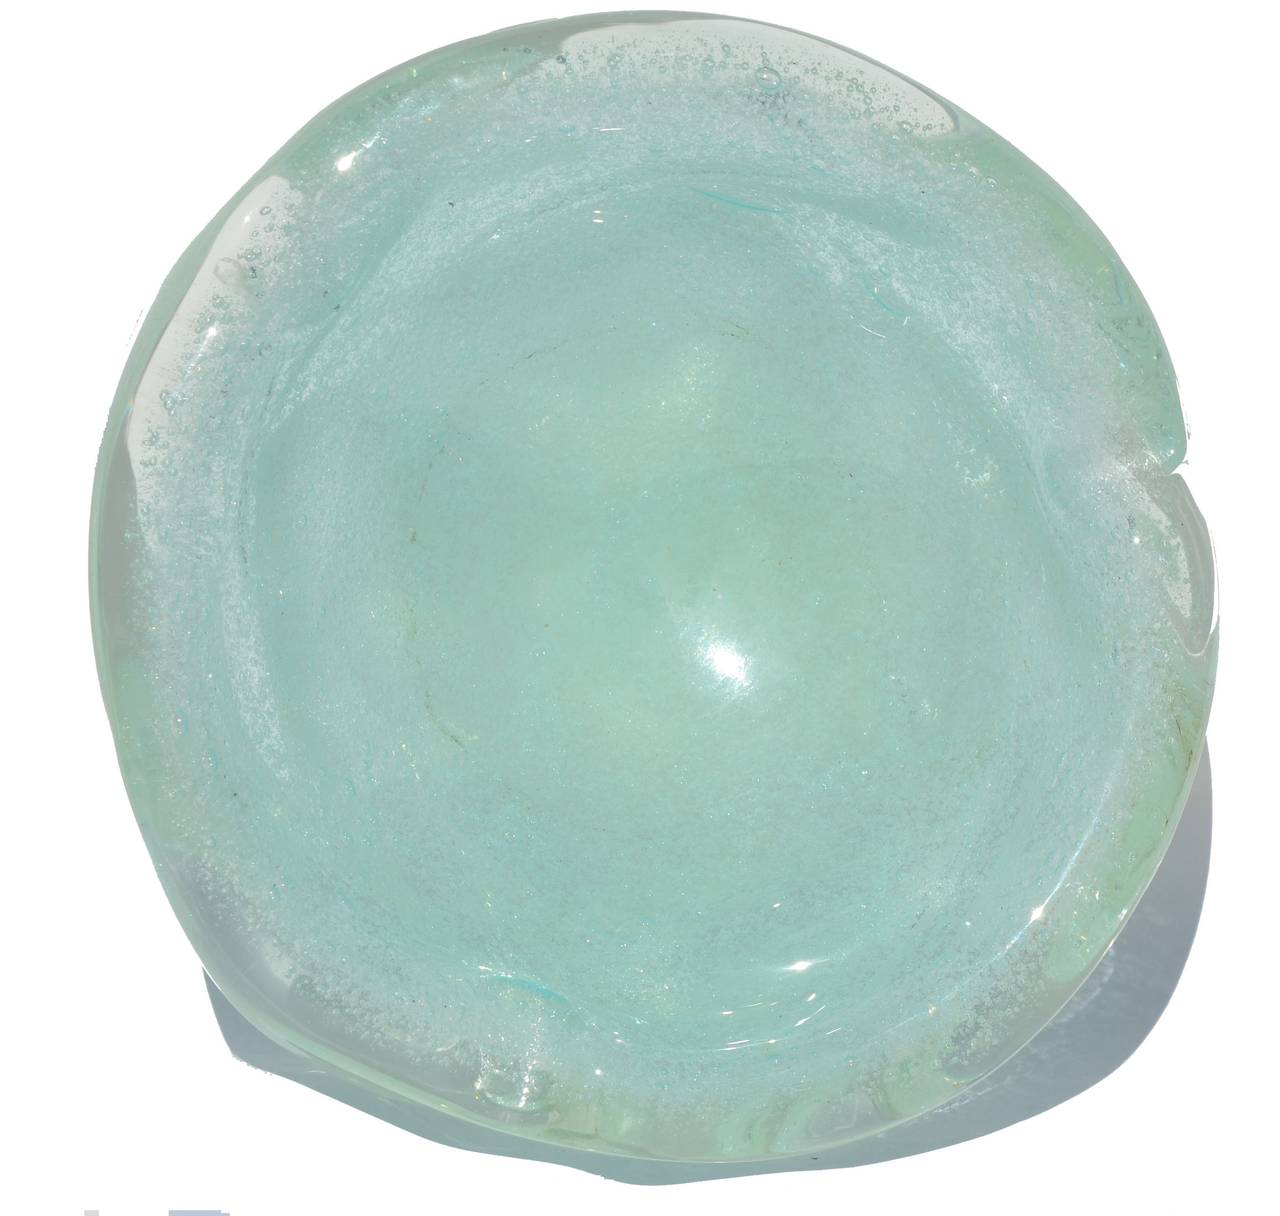 A Seguso seaform green handblown Murano glass ashtray or bowl with a lot of bubble inclusions done in the pelugoso technique. This exceptionally fine example of free-form Italian glass features a million bubbles and free-form knurled sides. The